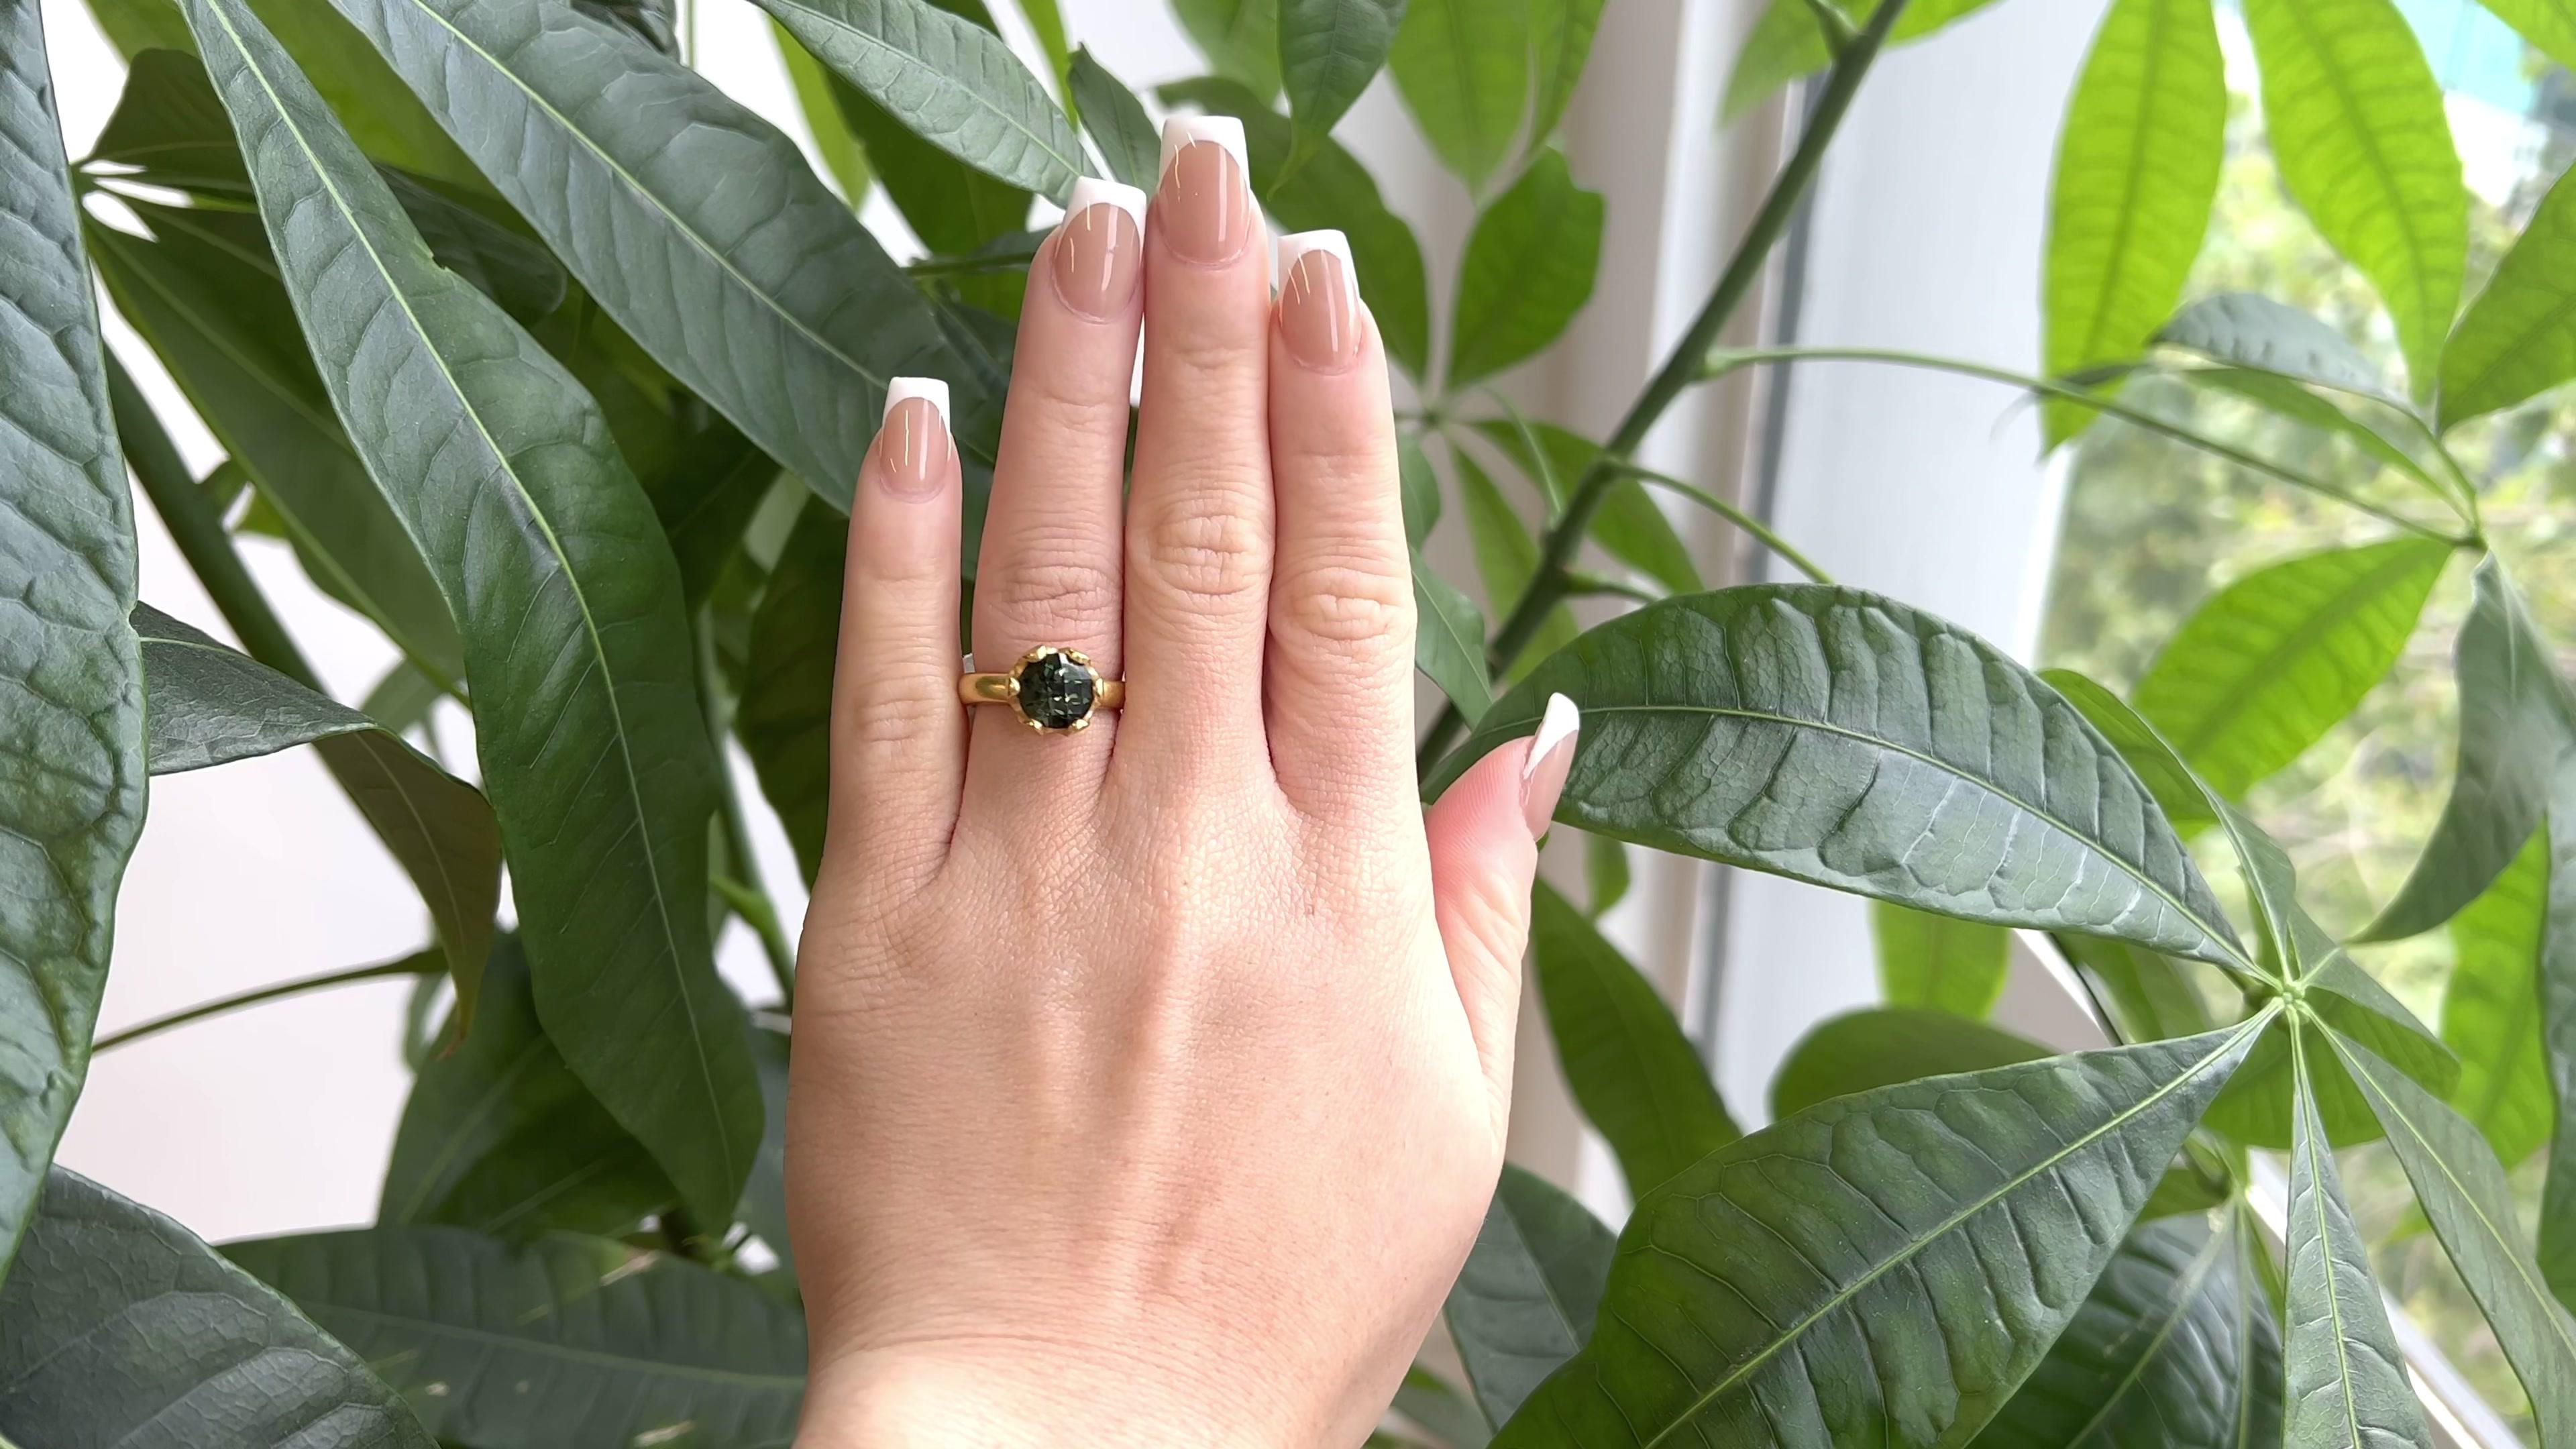 One Vintage Linda Lee Johnson Green Stone 21 Karat Gold Ring. Featuring one round green tourmaline. Crafted in 21 karat yellow gold, with Linda Lee Johnson maker's mark and purity mark. Circa 1990s. The ring is a size 6 3/4. 

About this Item: